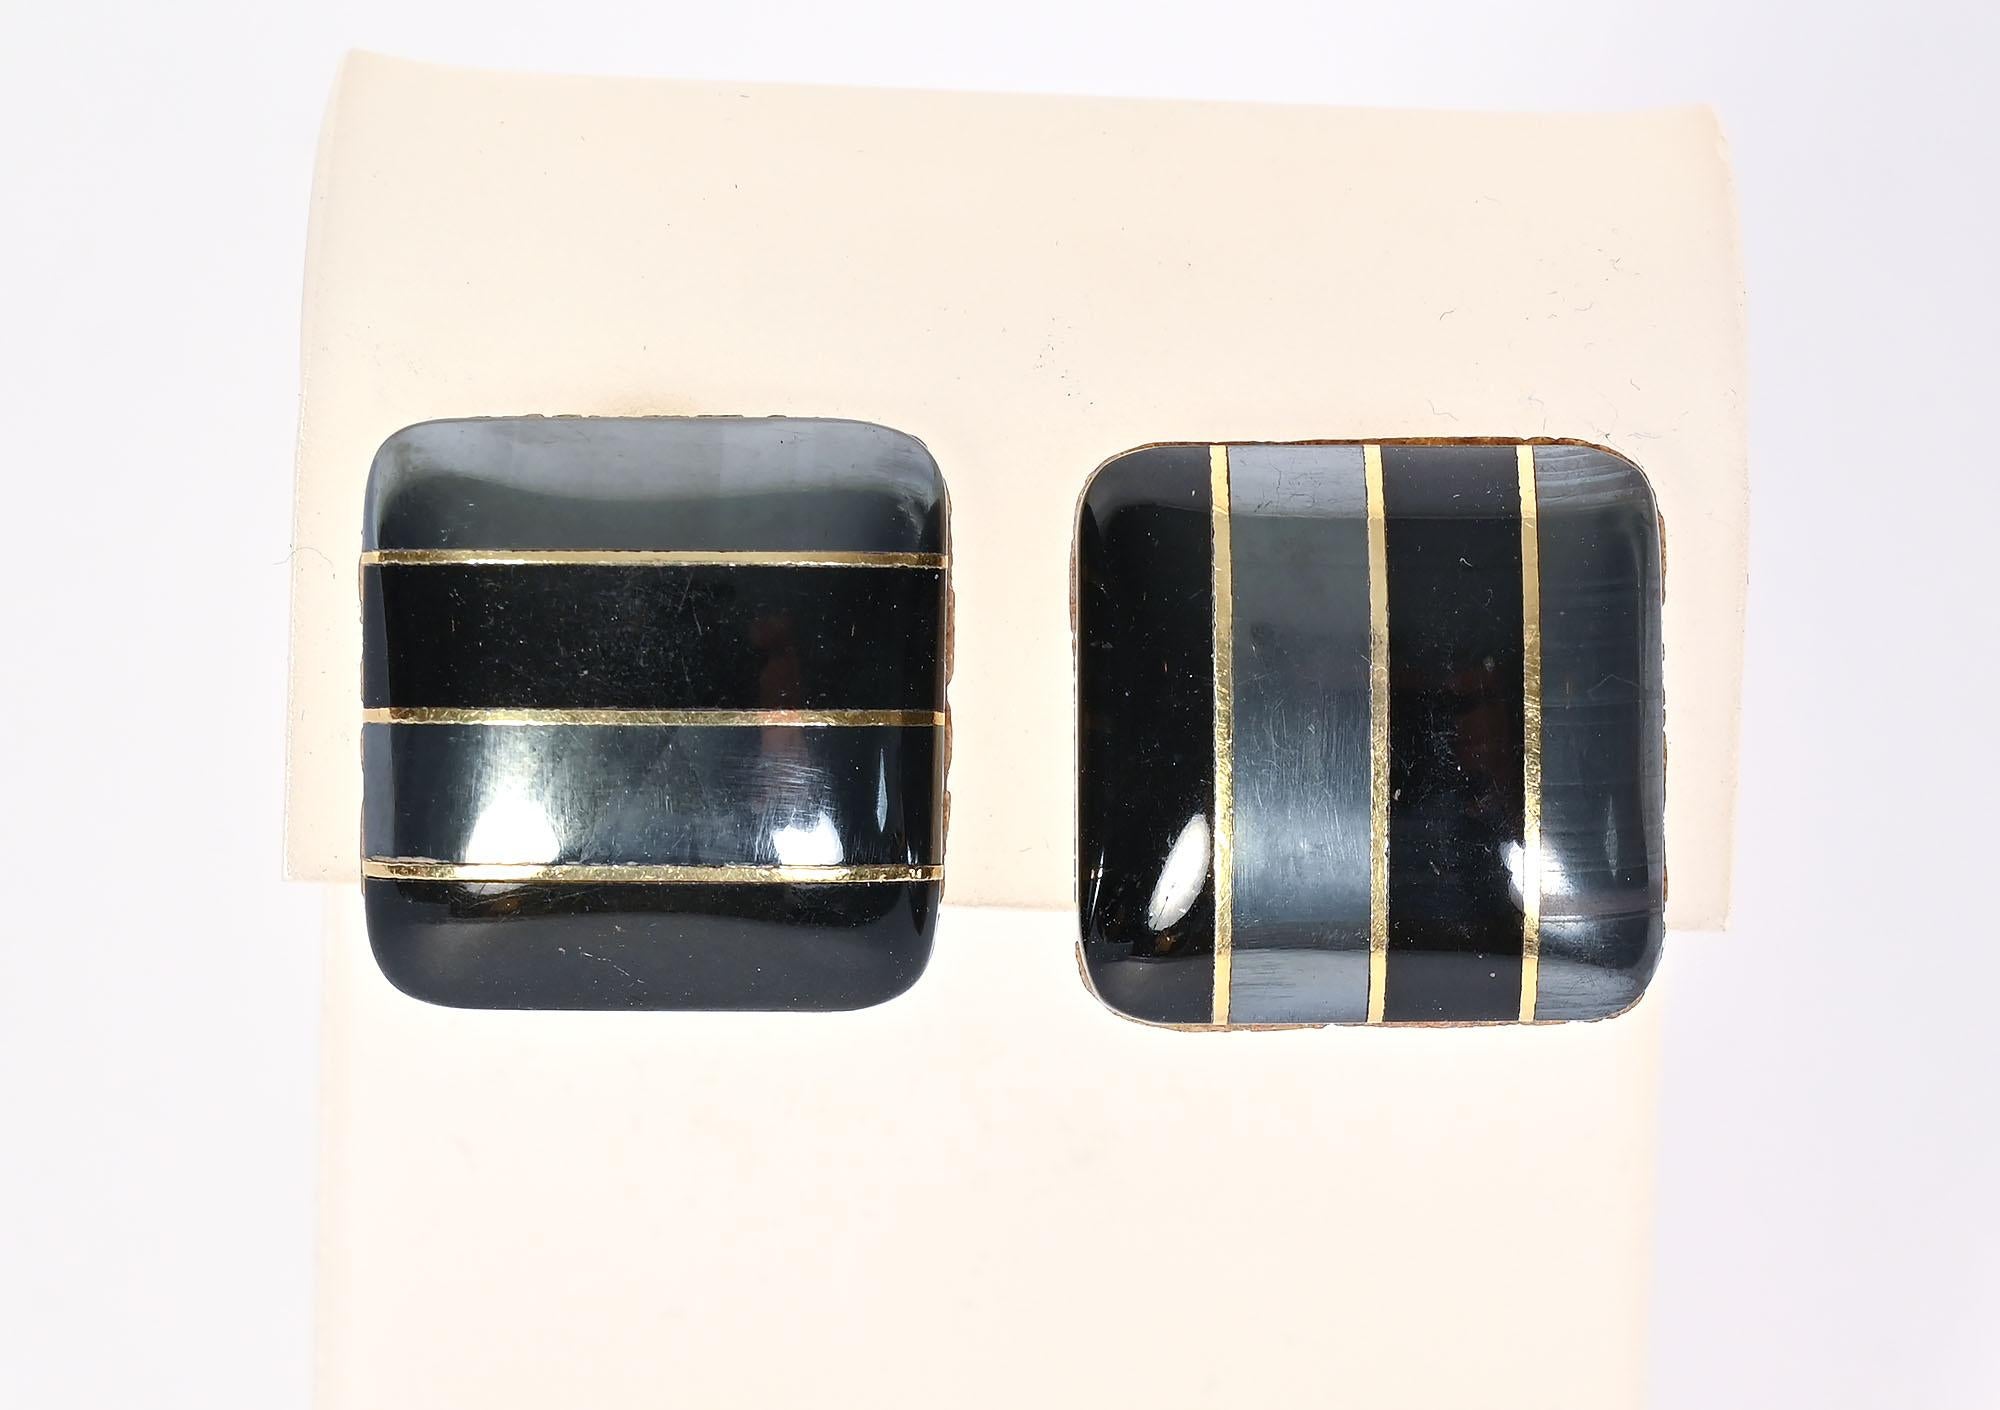 Unusual pair of fraternal twin earrings by Tiffany. The two are the same design but are set at different angles. Both pairs have two rows of hematite and two of black jade, separated by a band of gold.
The earrings have clip backs that can be